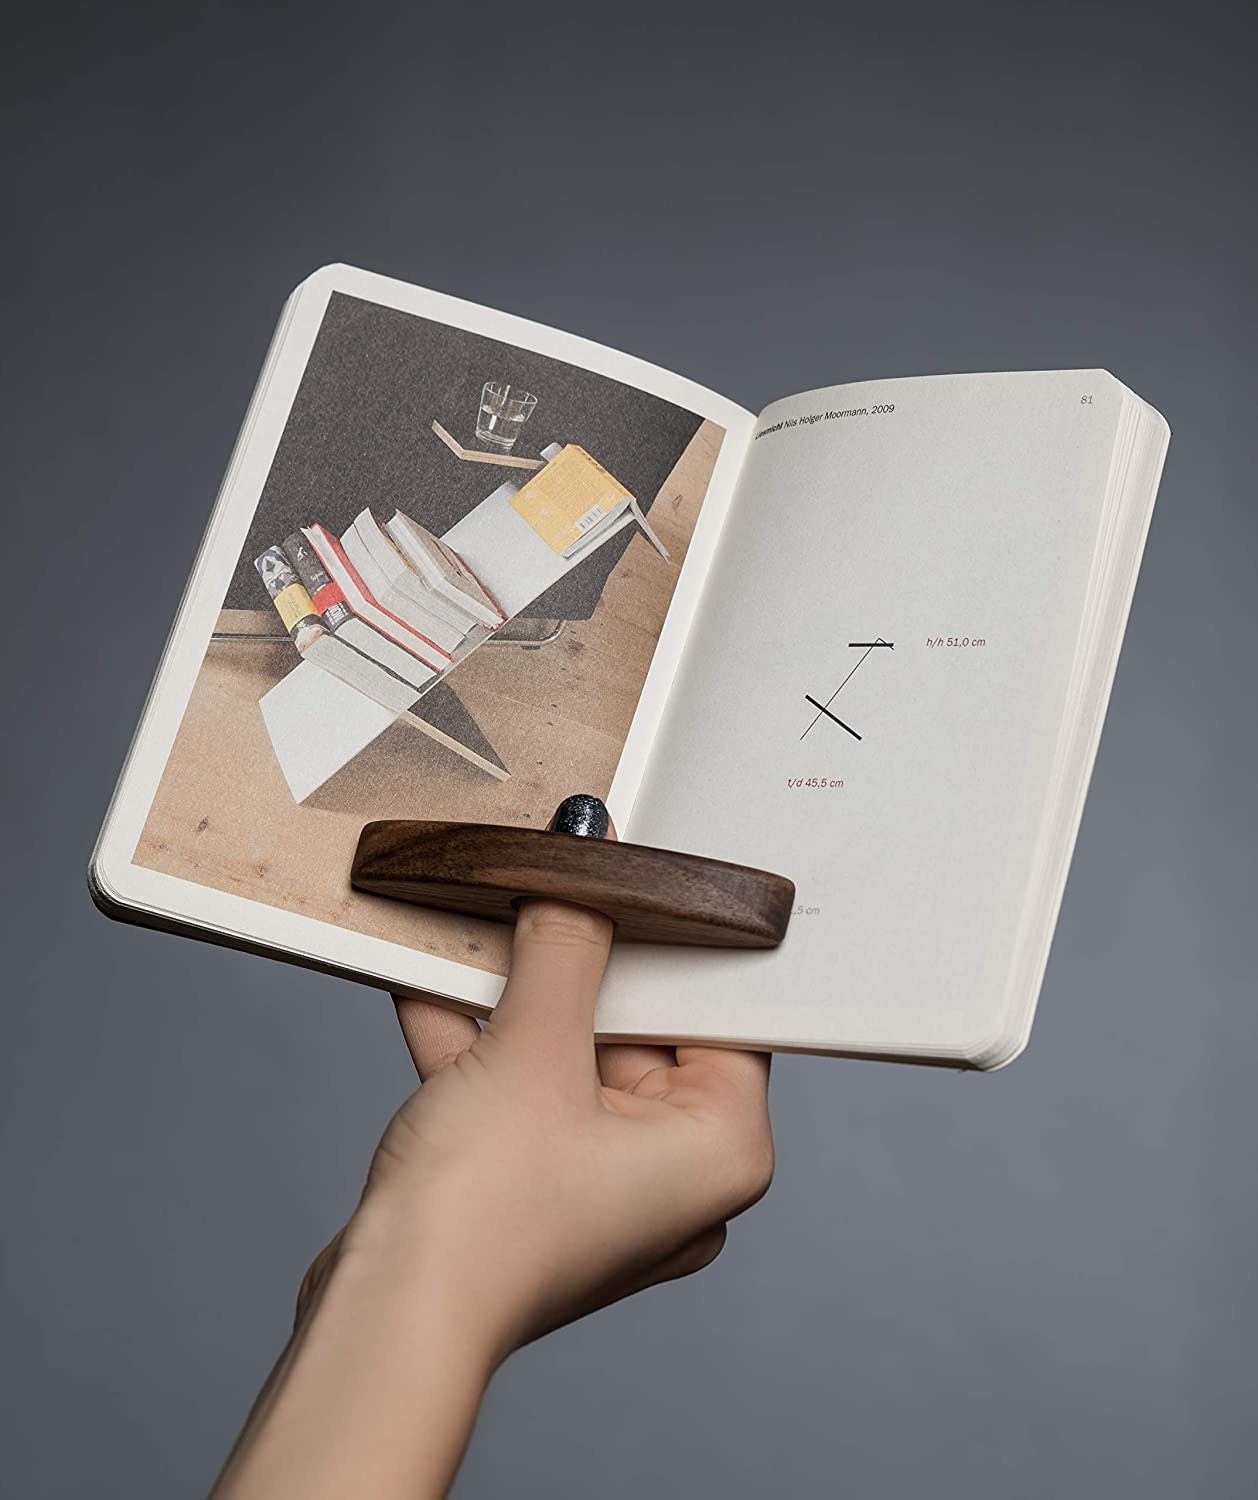 A person&#x27;s hand holding up a book propped open with the thumb gadget